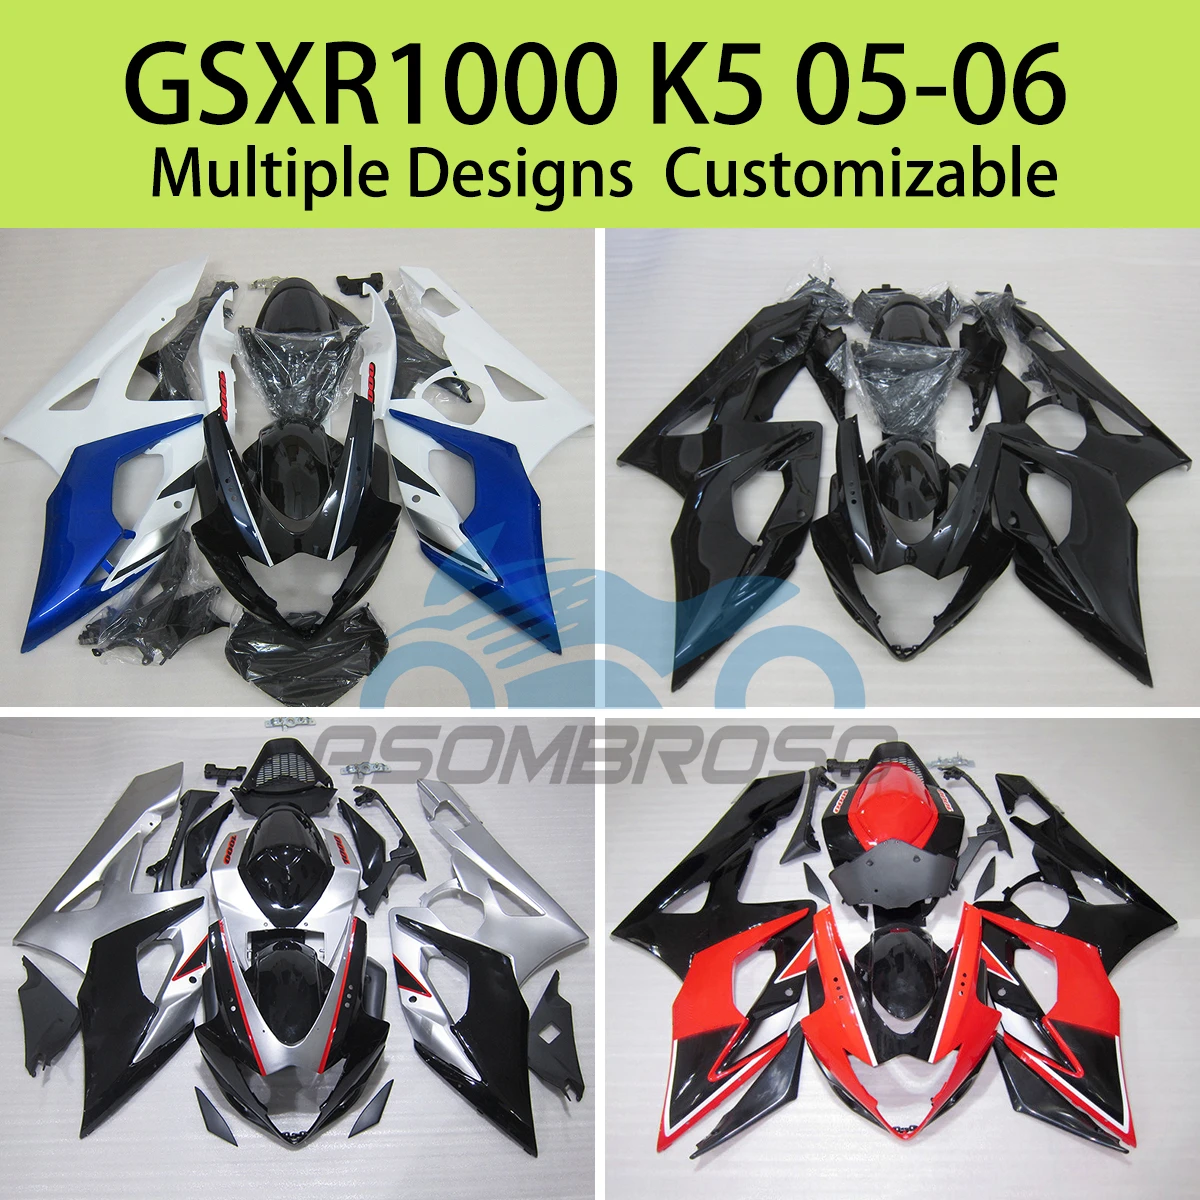 

GSXR1000 2005 2006 New Style Fairing Kit for SUZUKI GSXR 1000 K5 05 06 Injection Customizable Motorcycle Accessories Fairings